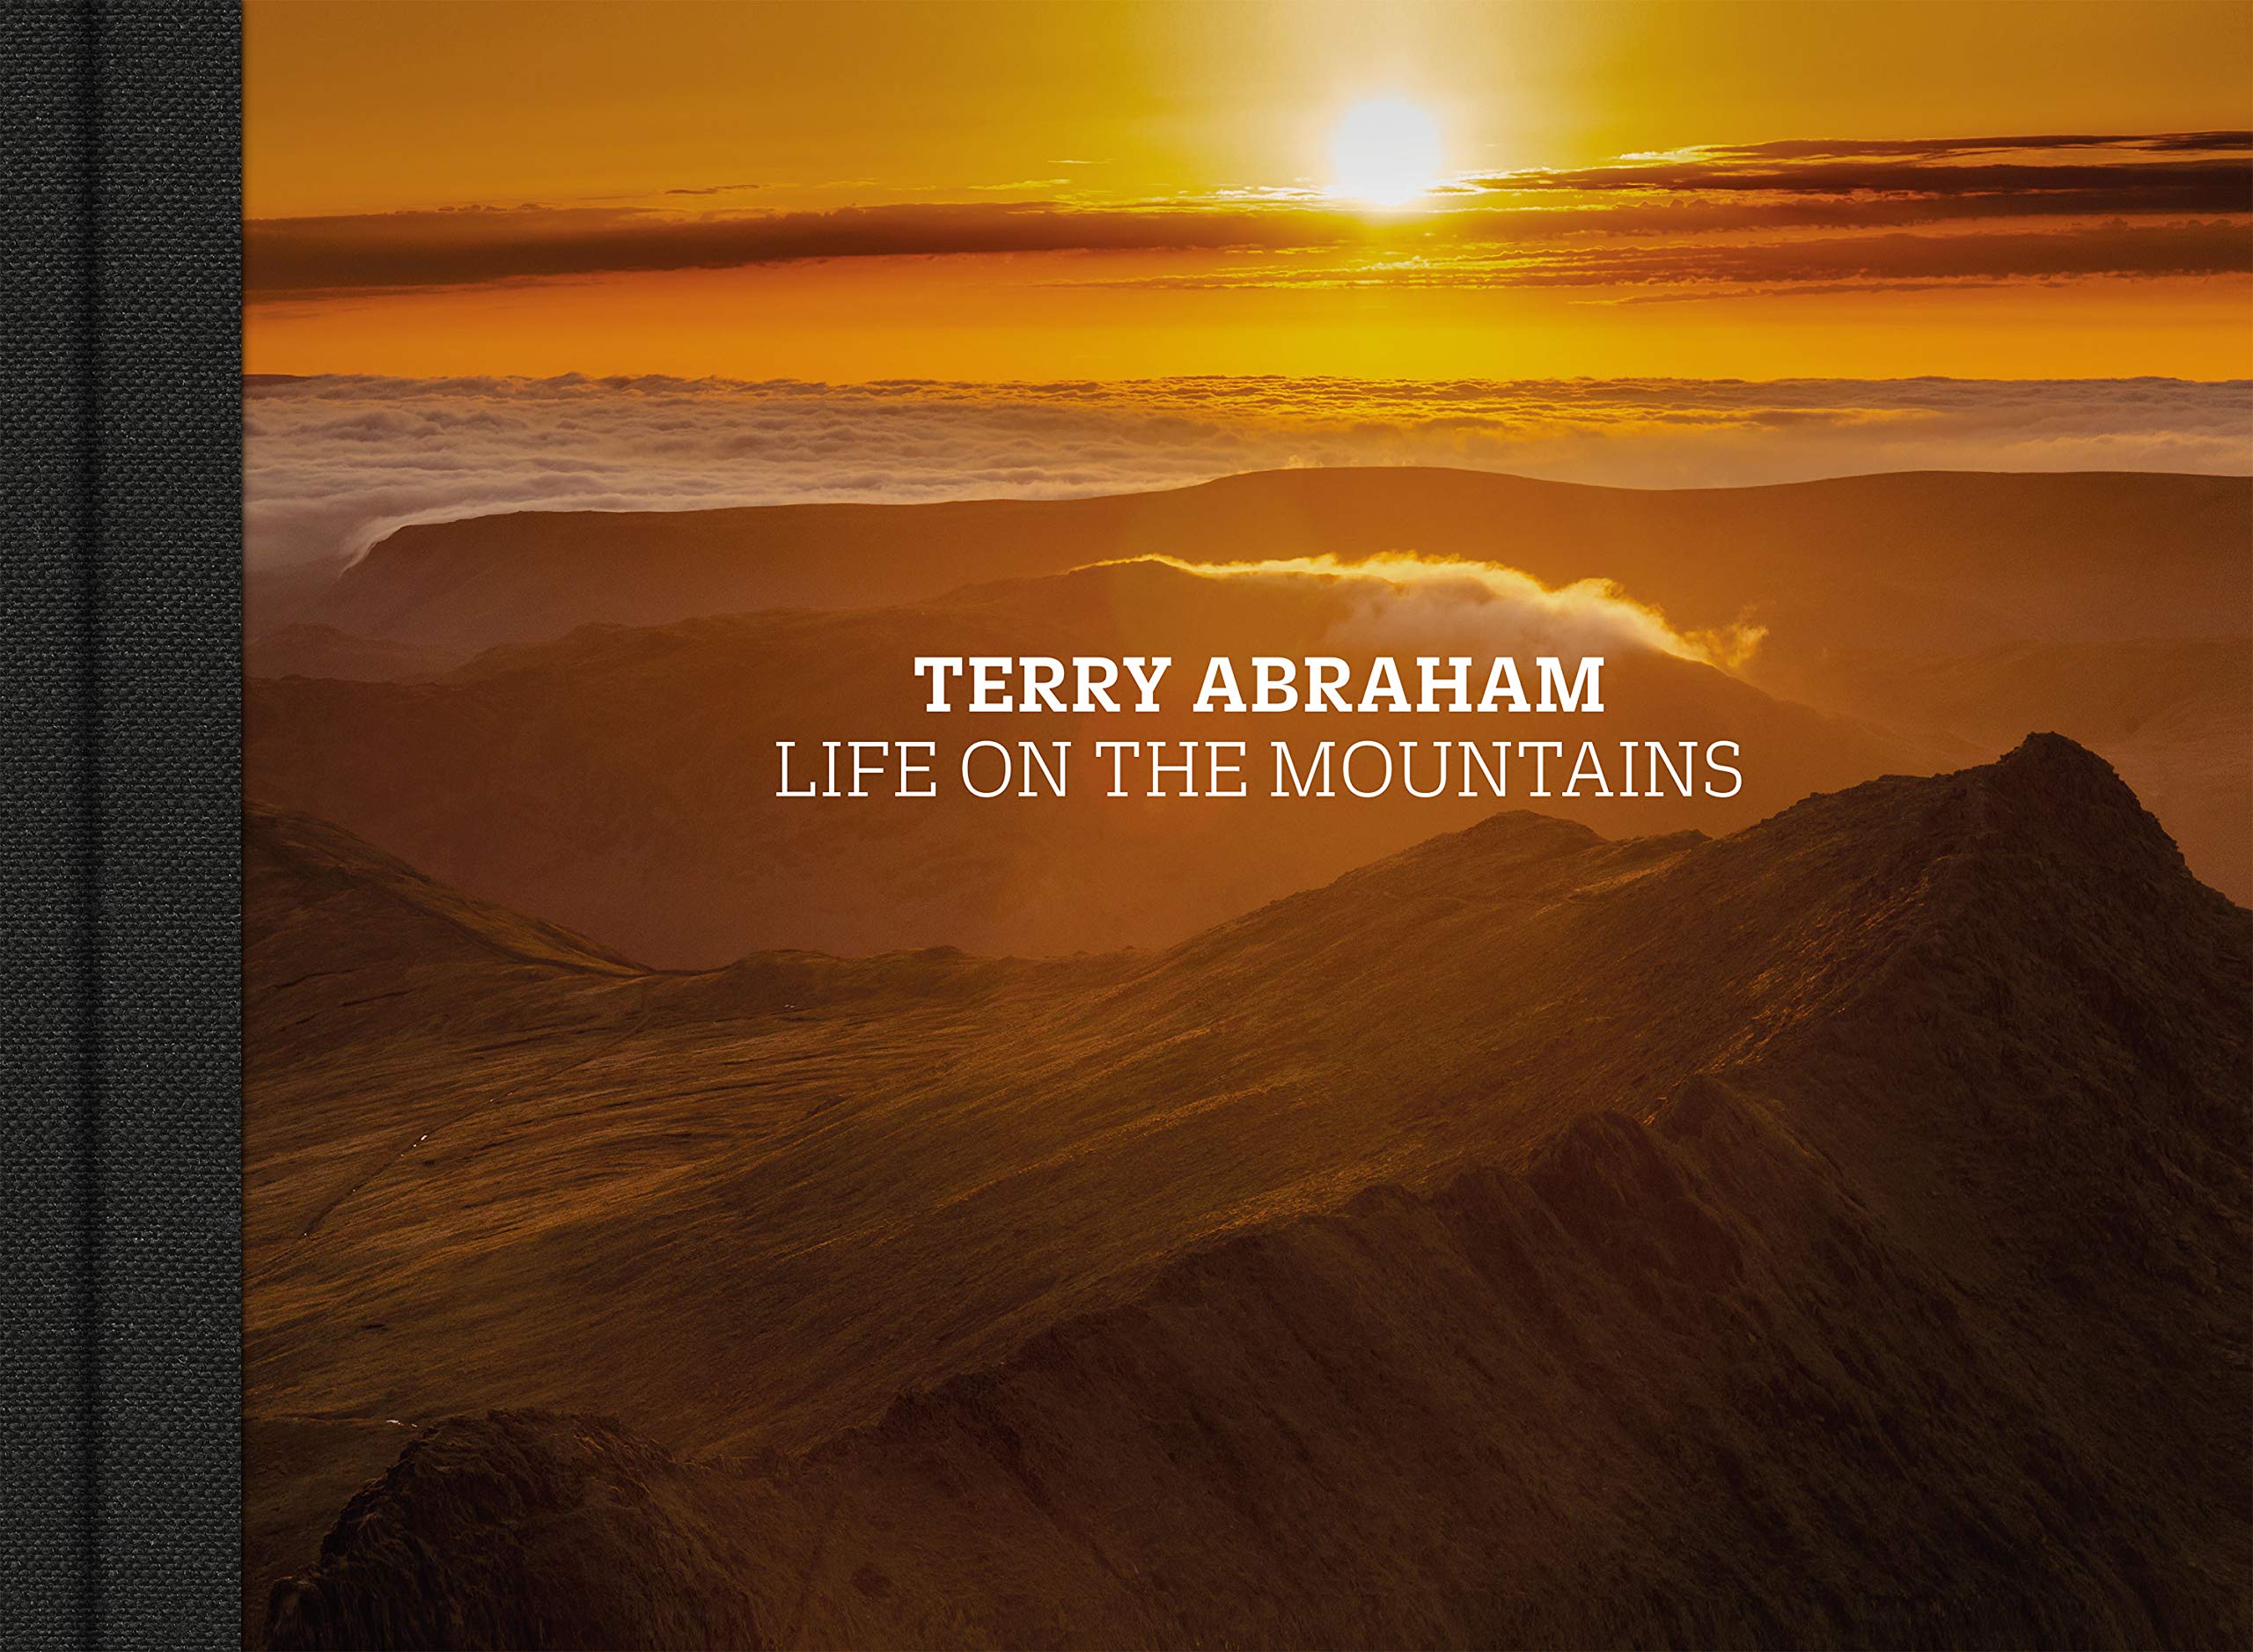 Terry Abraham: Life on the Mountains